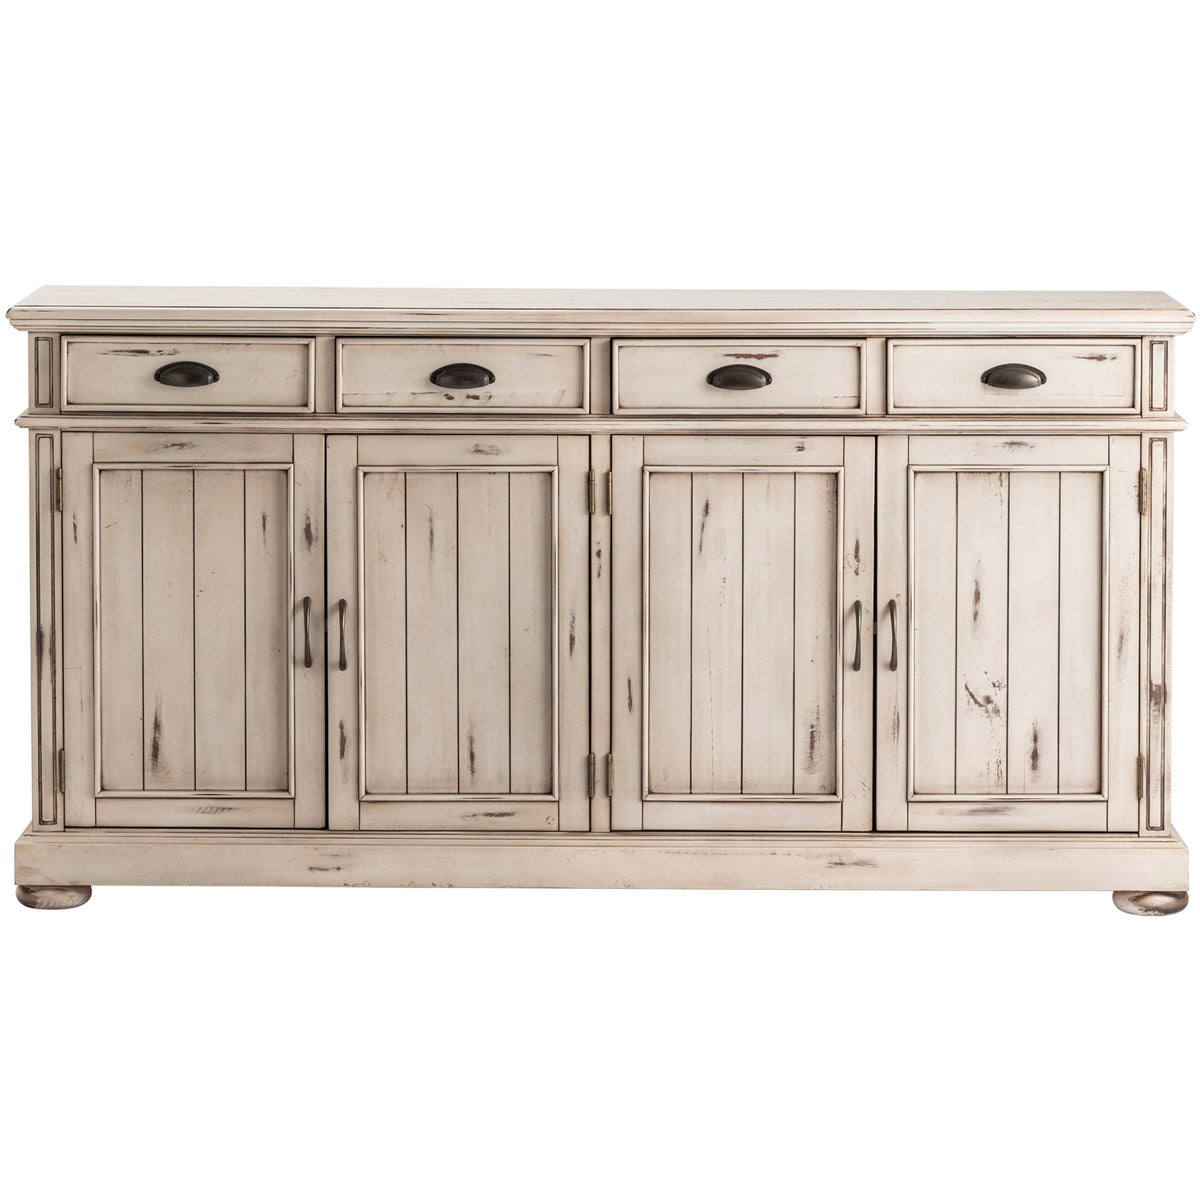 Crestview Collection Hawthorne Estate 72" x 17" x 37" 4-Drawer 4-Door Traditional Wood Sideboard In Distressed White Finish